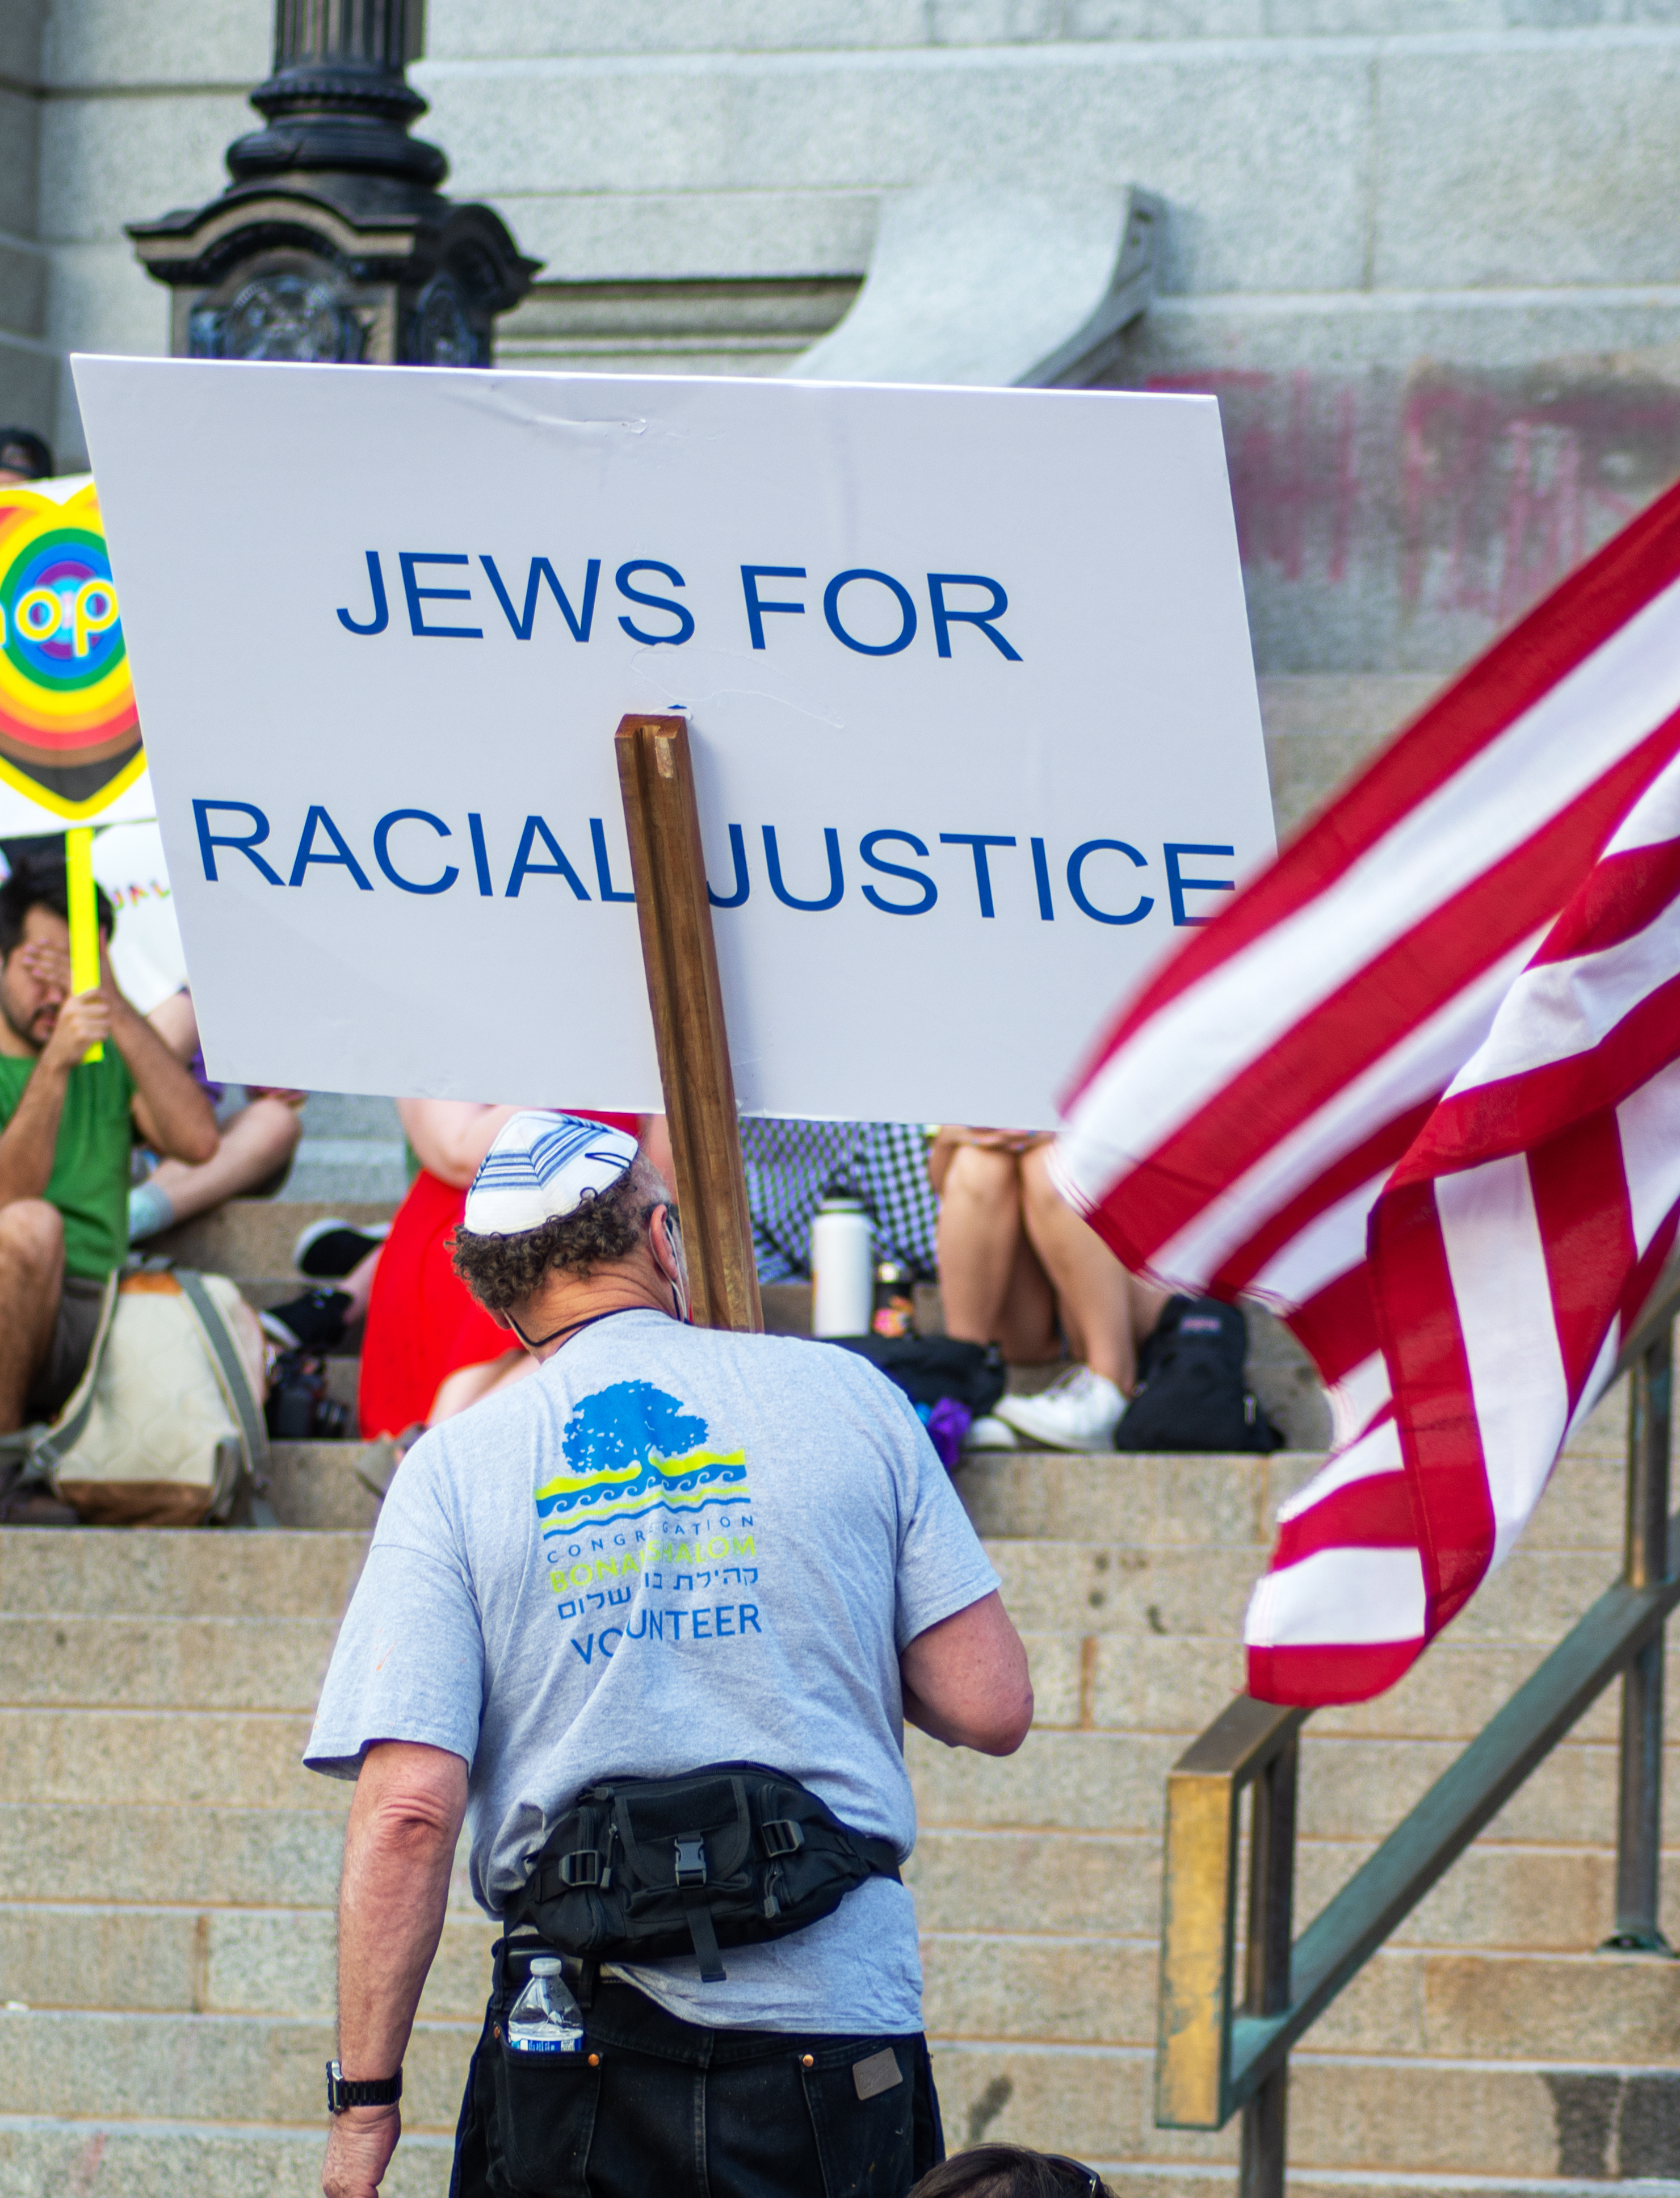 Jews for Racial Justice